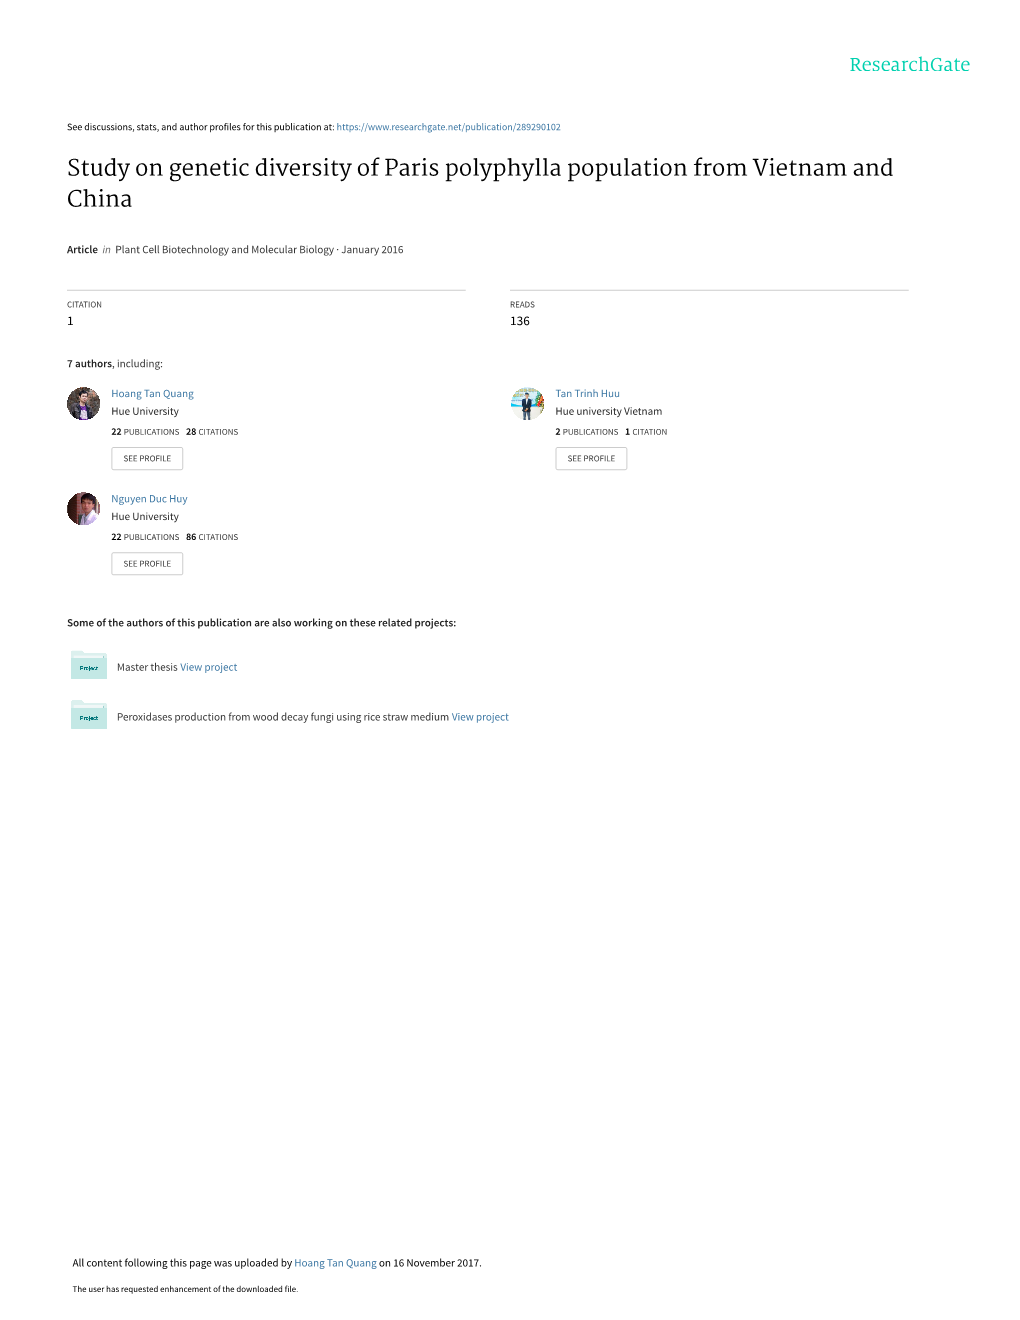 Study on Genetic Diversity of Paris Polyphylla Population from Vietnam and China